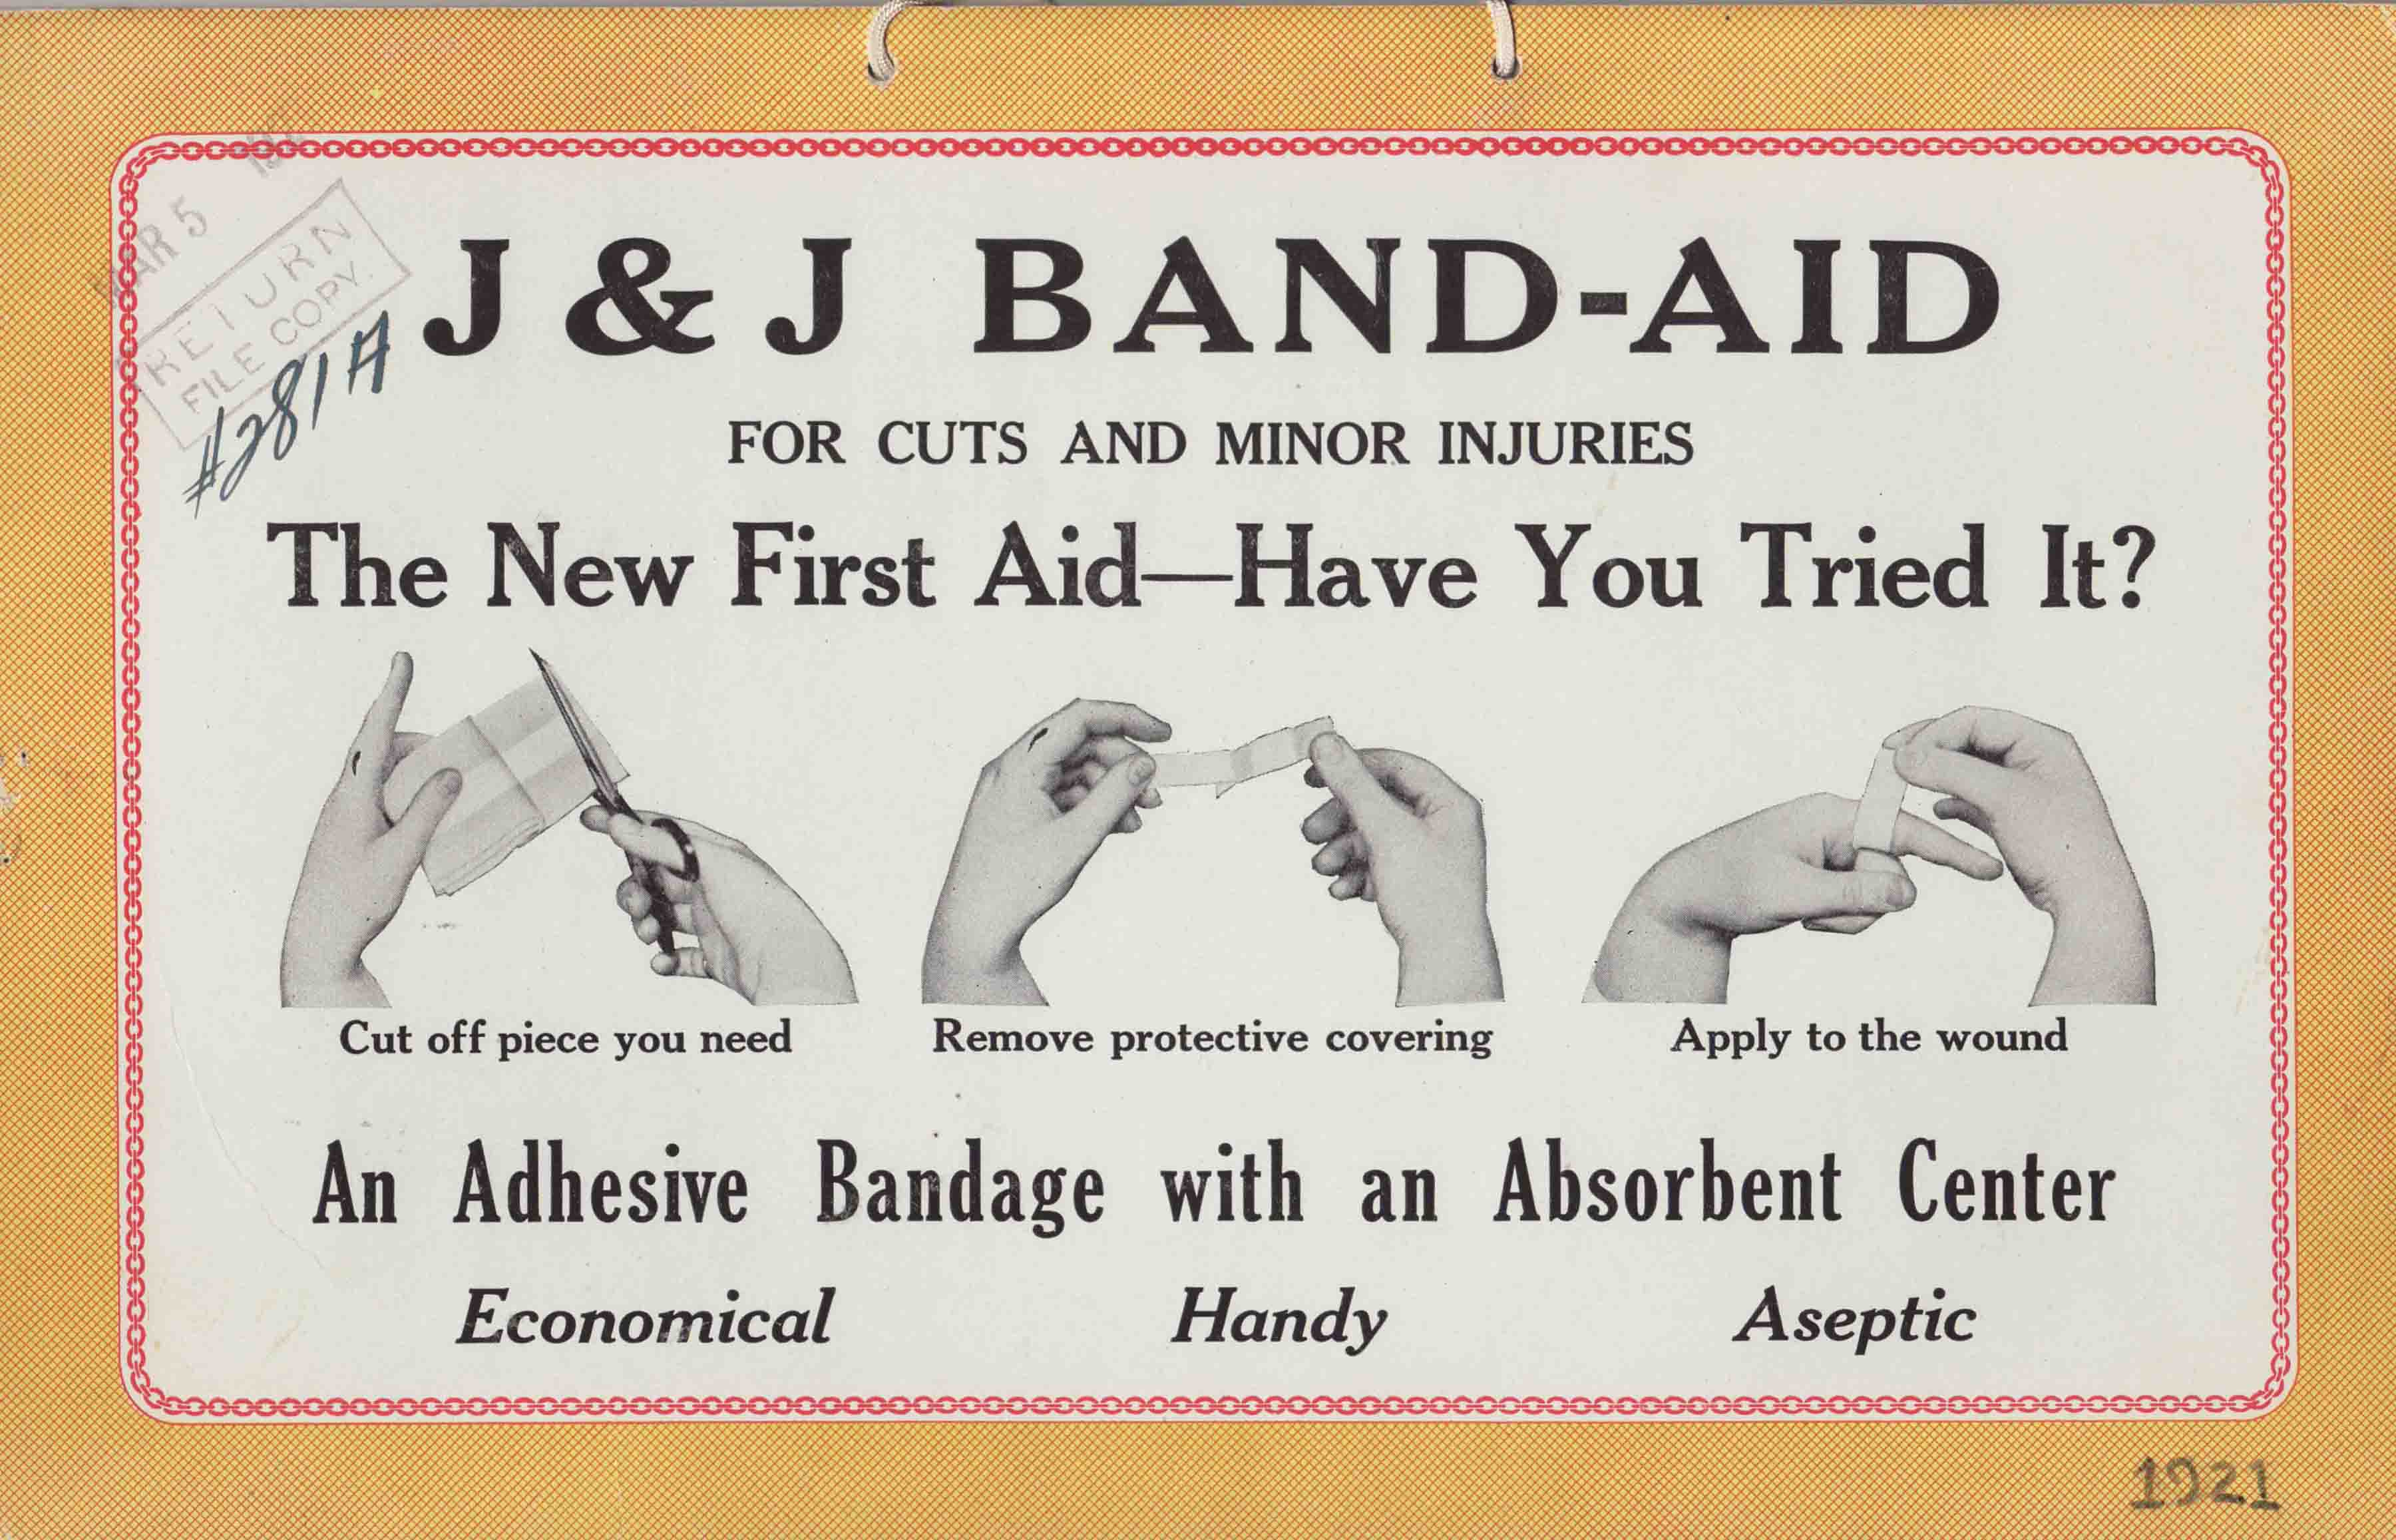 BAND-AID<sup>®/<sup> Brand Adhesive Bandage ad from 1920, showing the product as Earle Dickson invented it.  Image: Johnson & Johnson Archives.